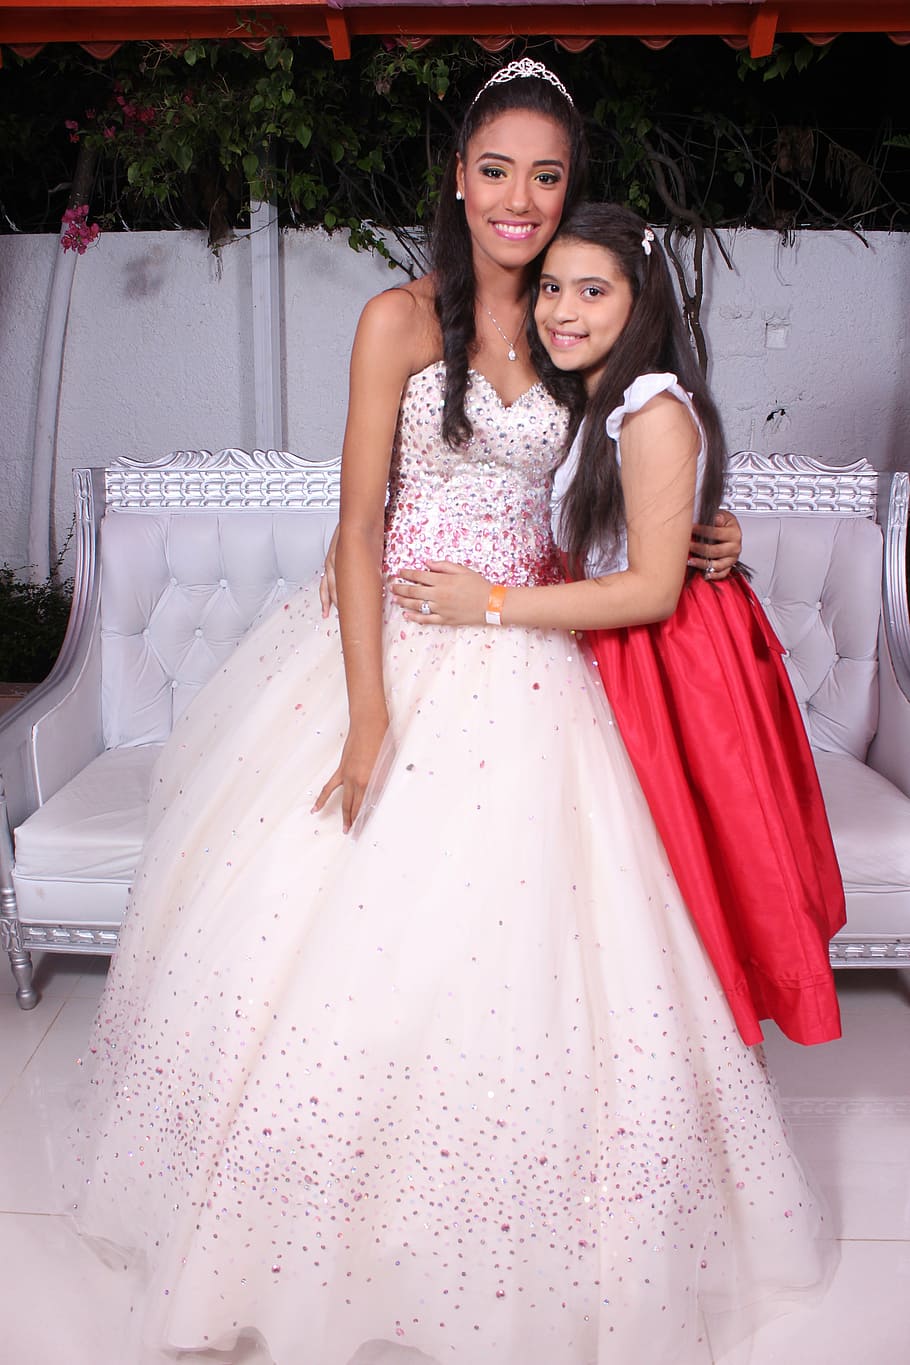 sisters, birthday, 15 years, special moment, girls, white dress, party, women, bride, smiling